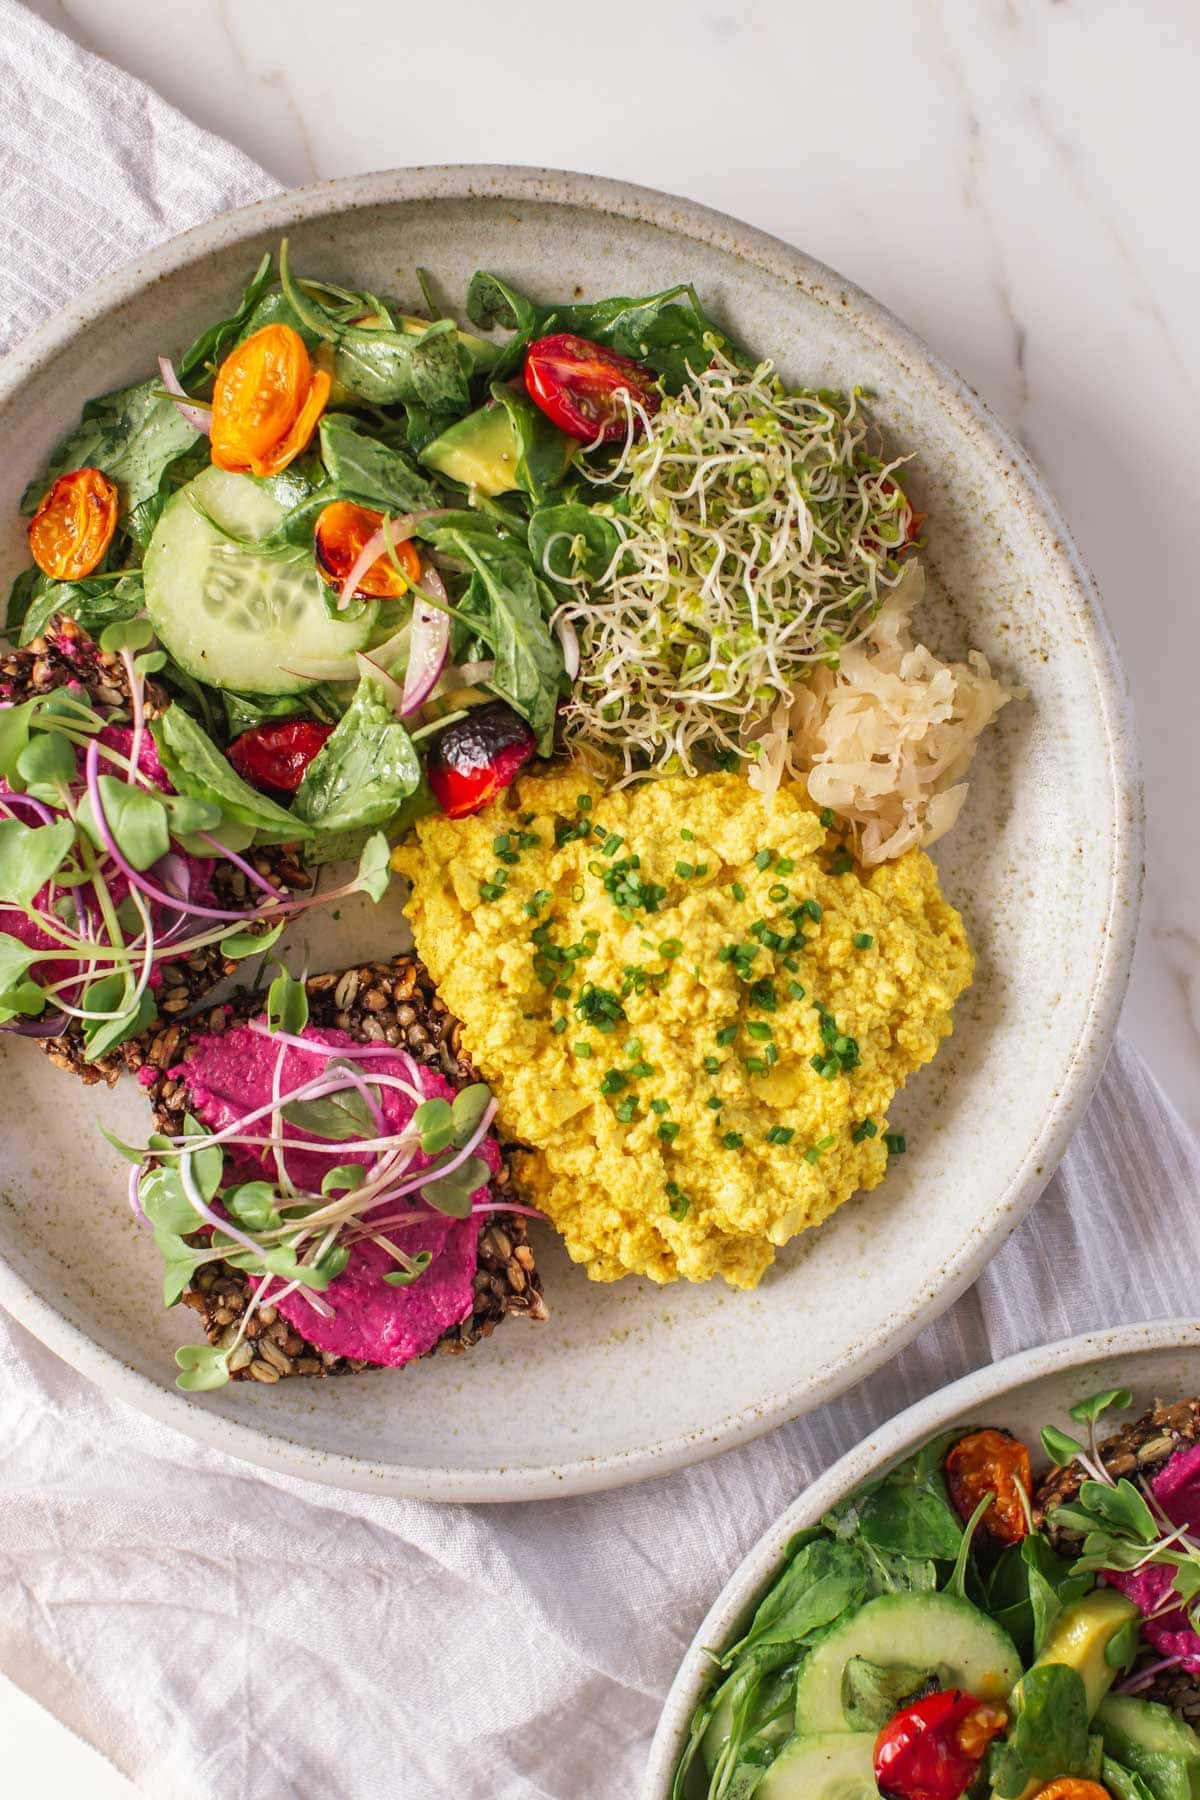 Plate filled with a healthy vegan breakfast of scrambled tofu with salad, sprouts and kraut